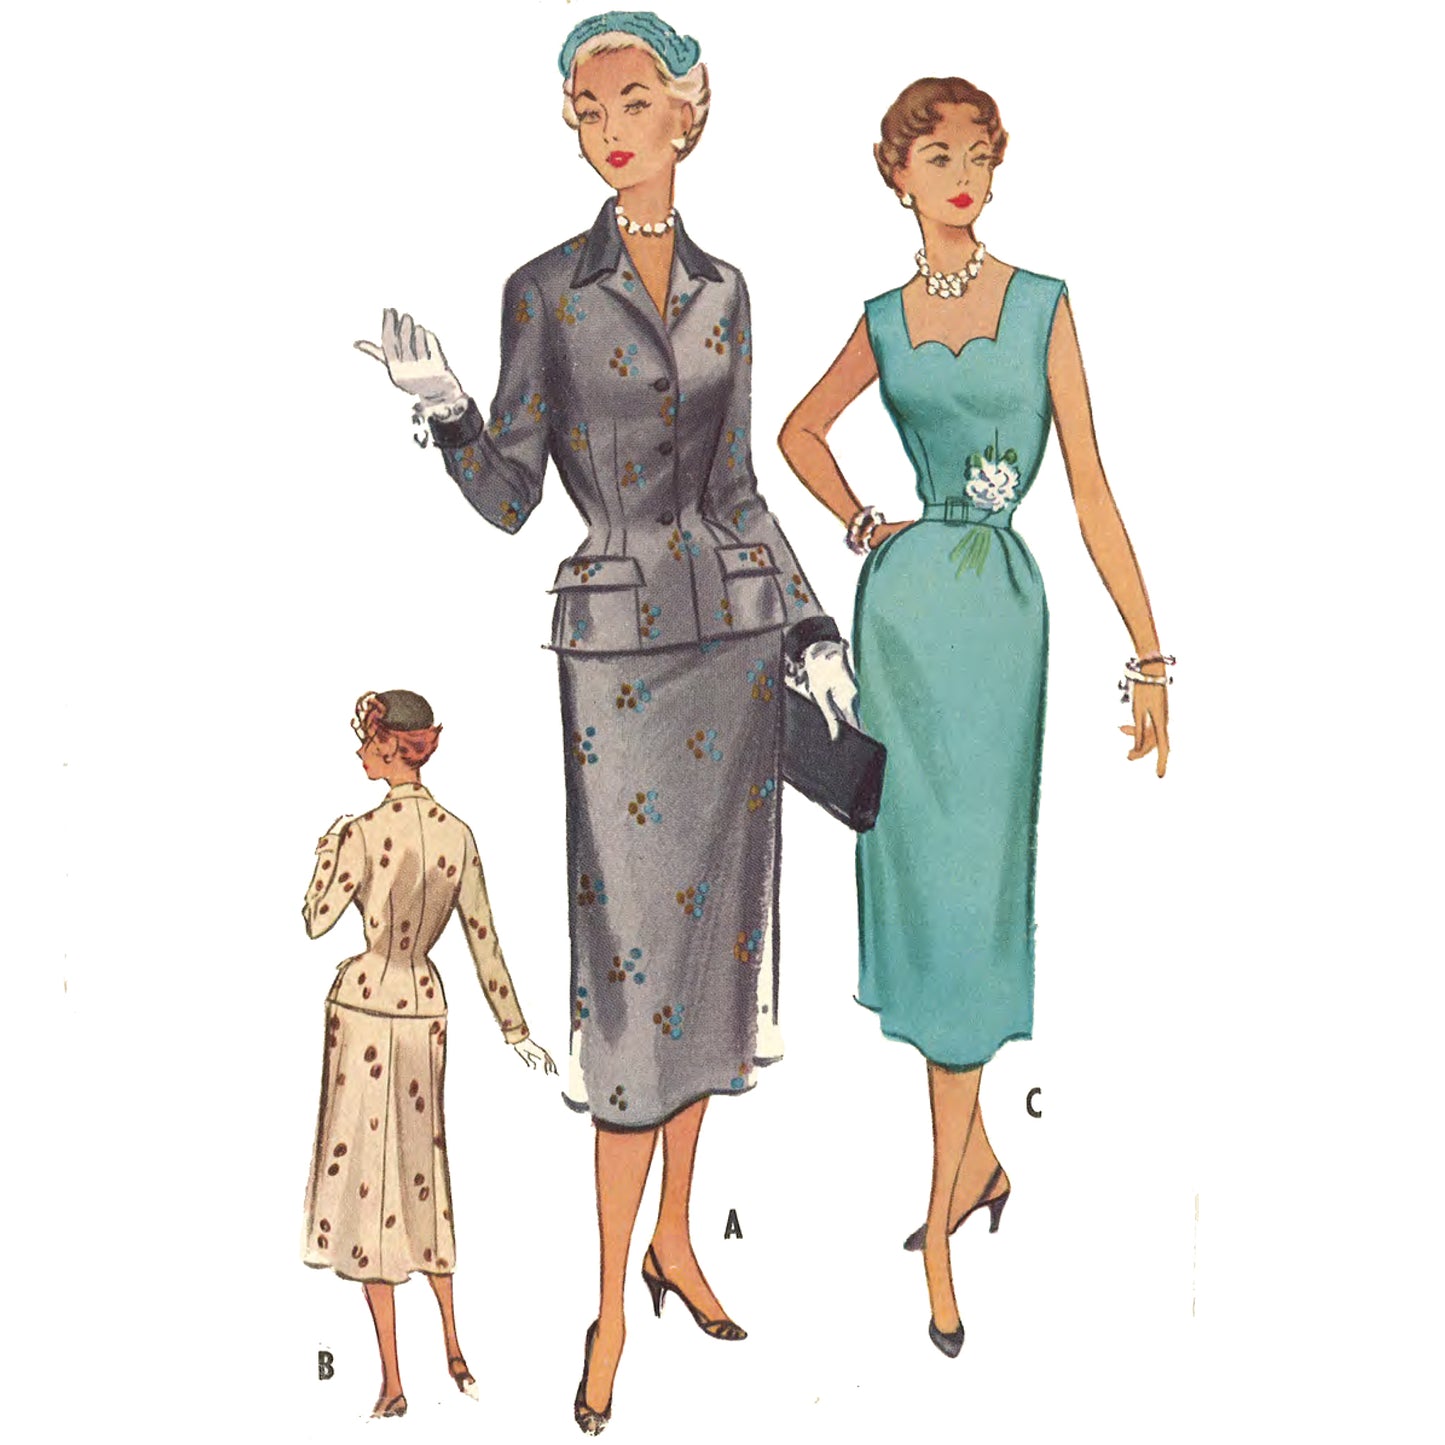 Women wearing wiggle dresses. Left to Right: View B, jacket and dress, in cream with red dots, back view. View A, jacket and dress in grey. View C, dress in teal.